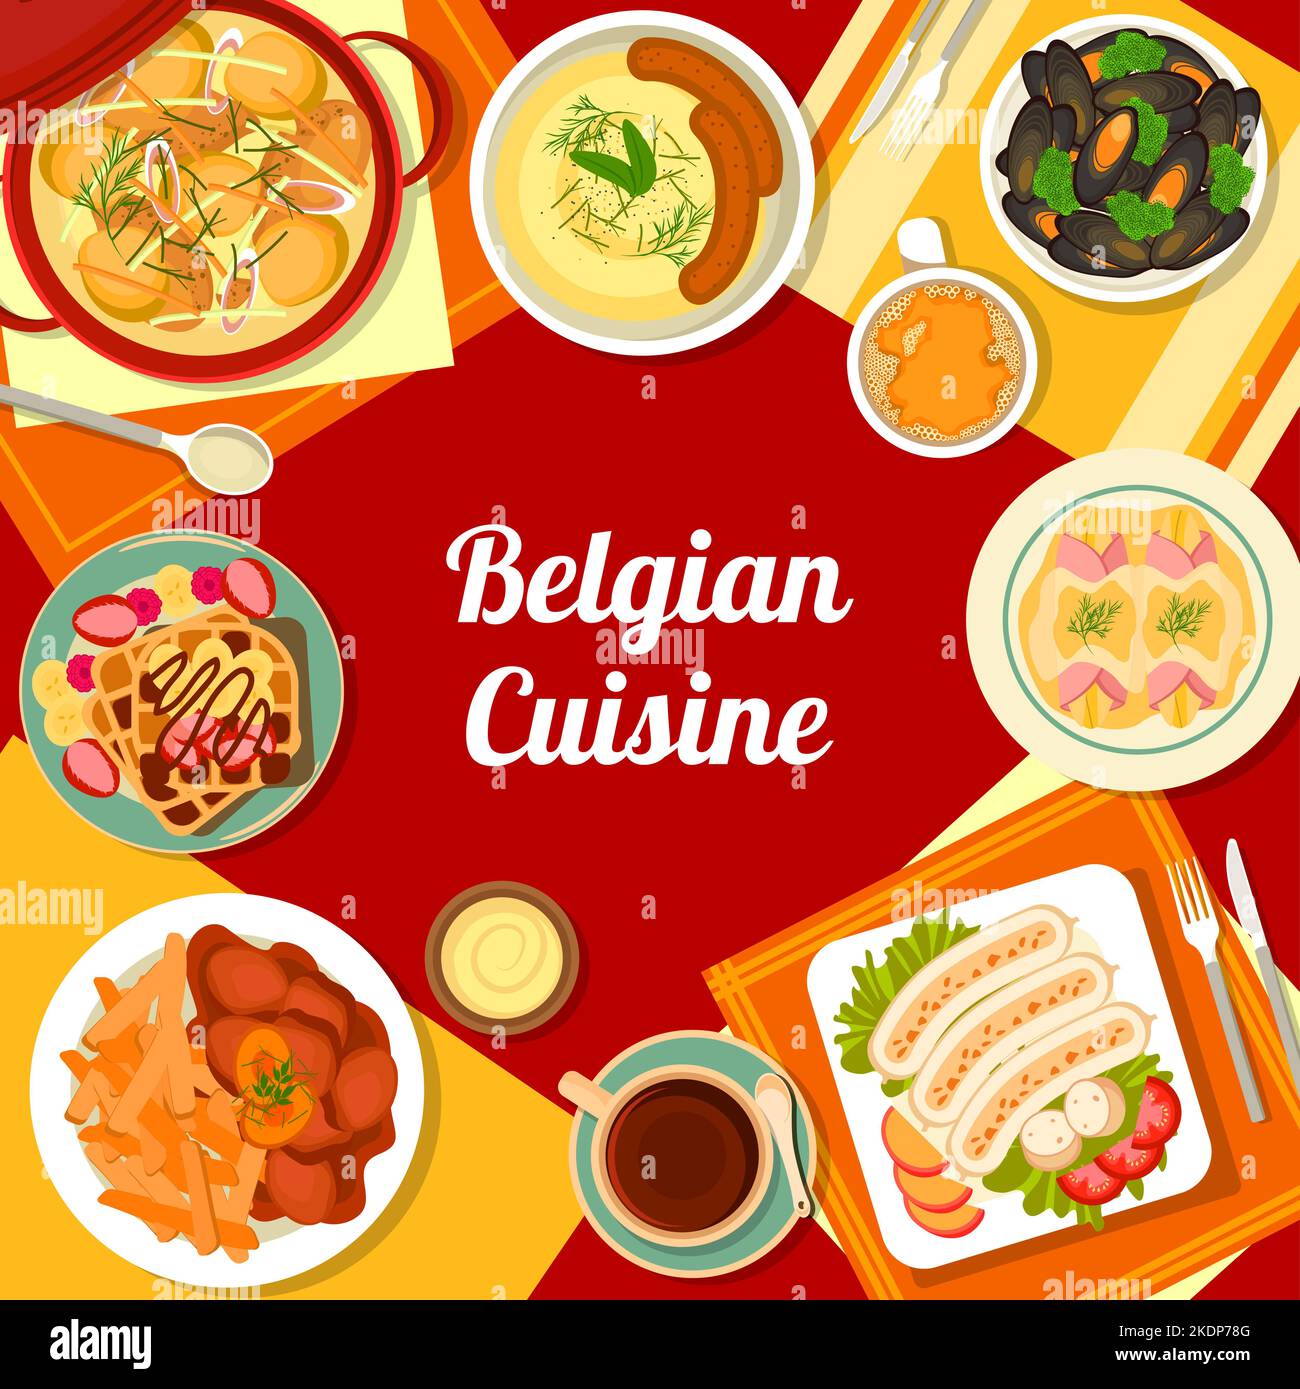 Belgian cuisine menu cover for restaurant food meals, Belgium traditional dishes, vector. Belgian cuisine lunch or dinner and pastry meals, triple sausage with beer steamed mussels and mashed potato Stock Vector